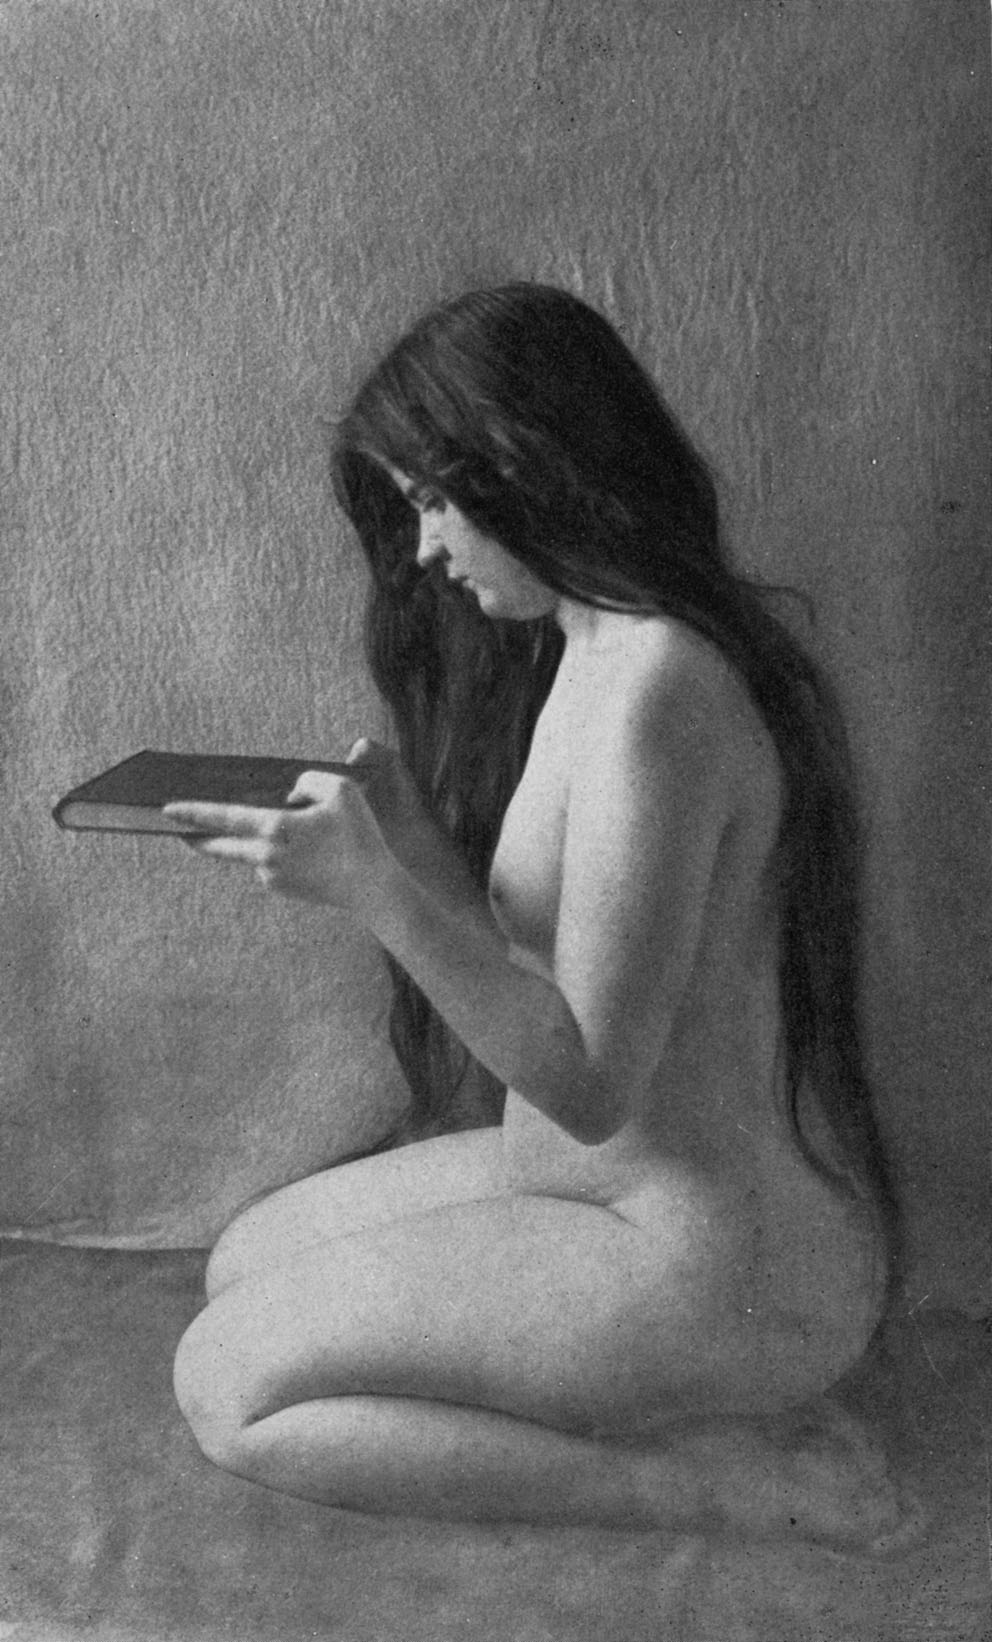 A Brief History Of Nude Photography (1839-1939)